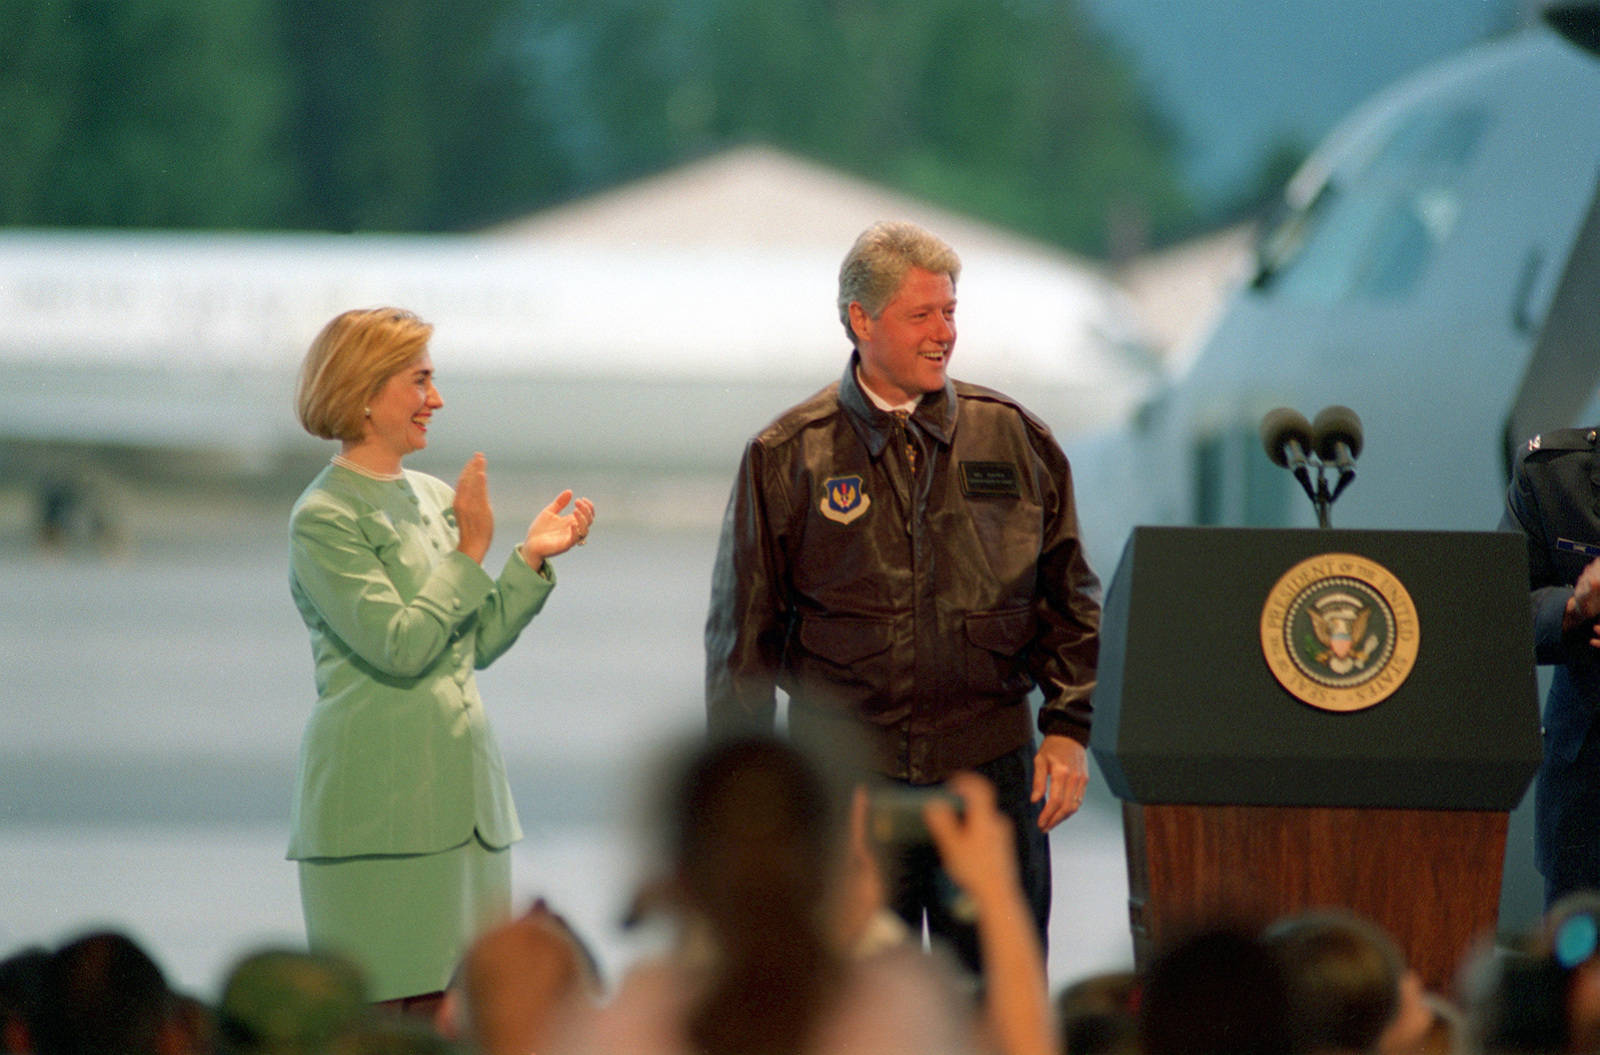 Iconic Image of Former President Bill Clinton and First Lady Hillary Clinton Wallpaper